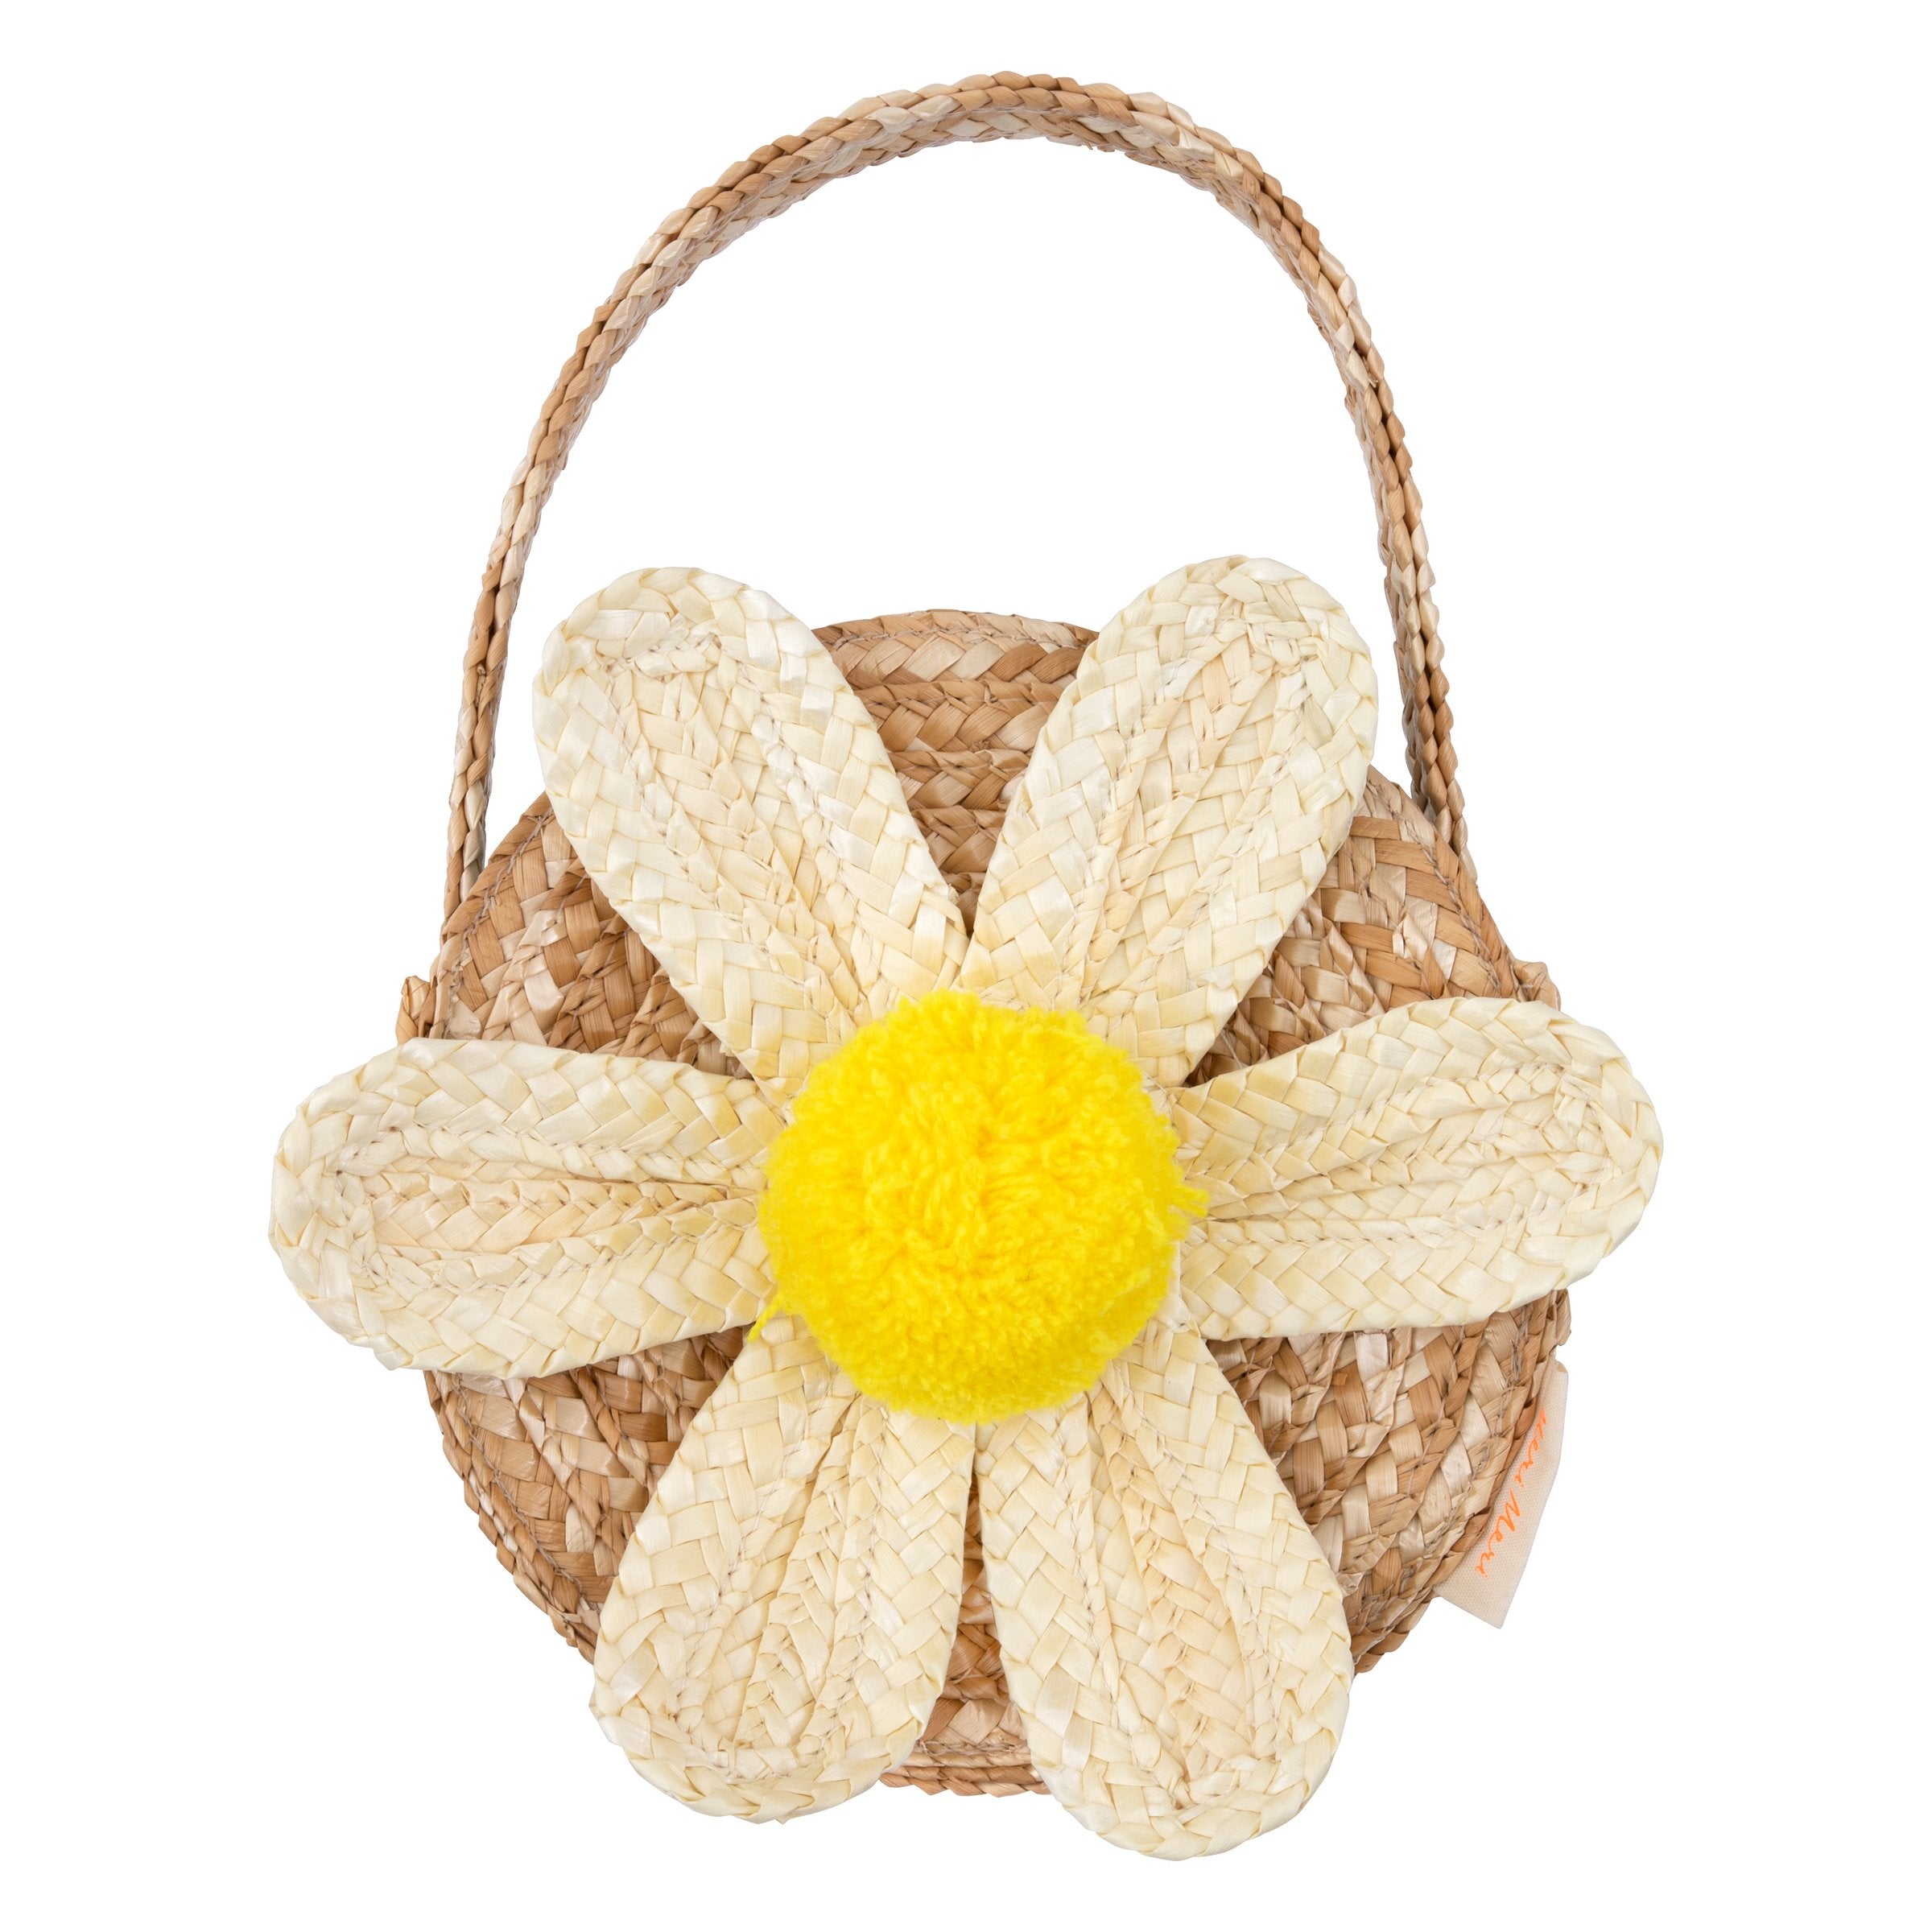 This sensational straw kids bag has a raffia daisy with a yellow pompom in the center.